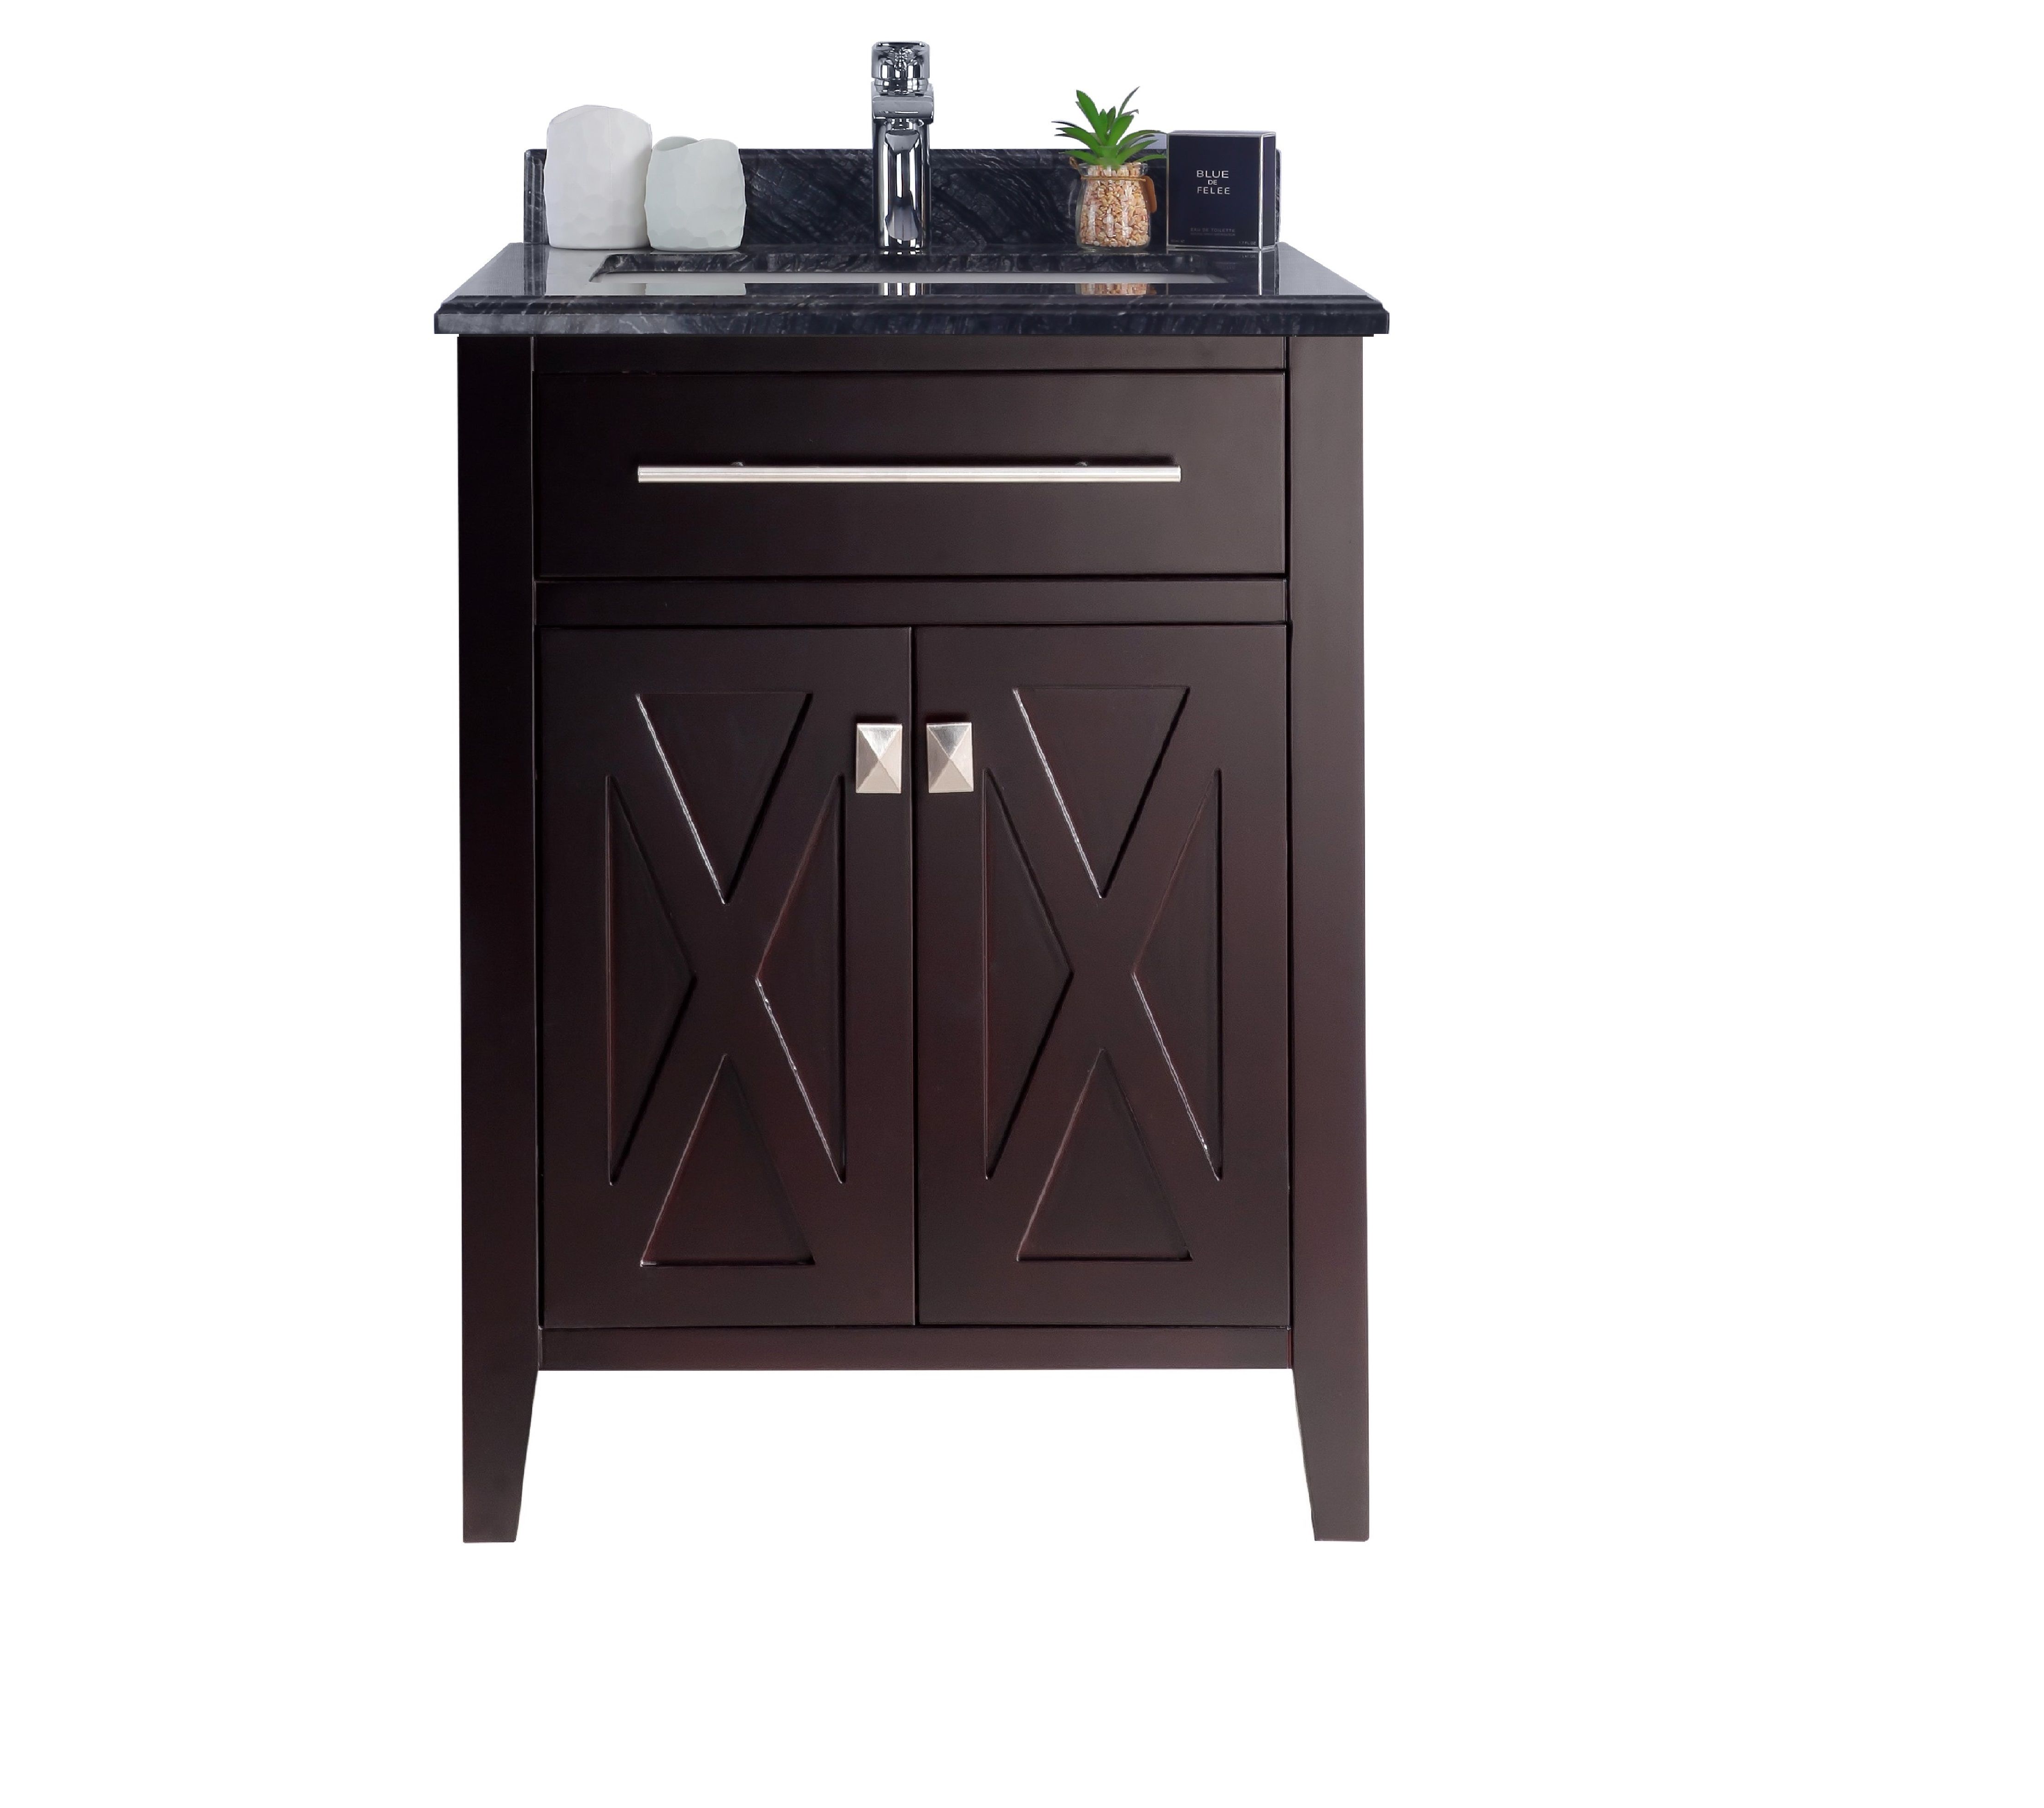 24" Single Sink Bathroom Cabinet + Top and Color Options